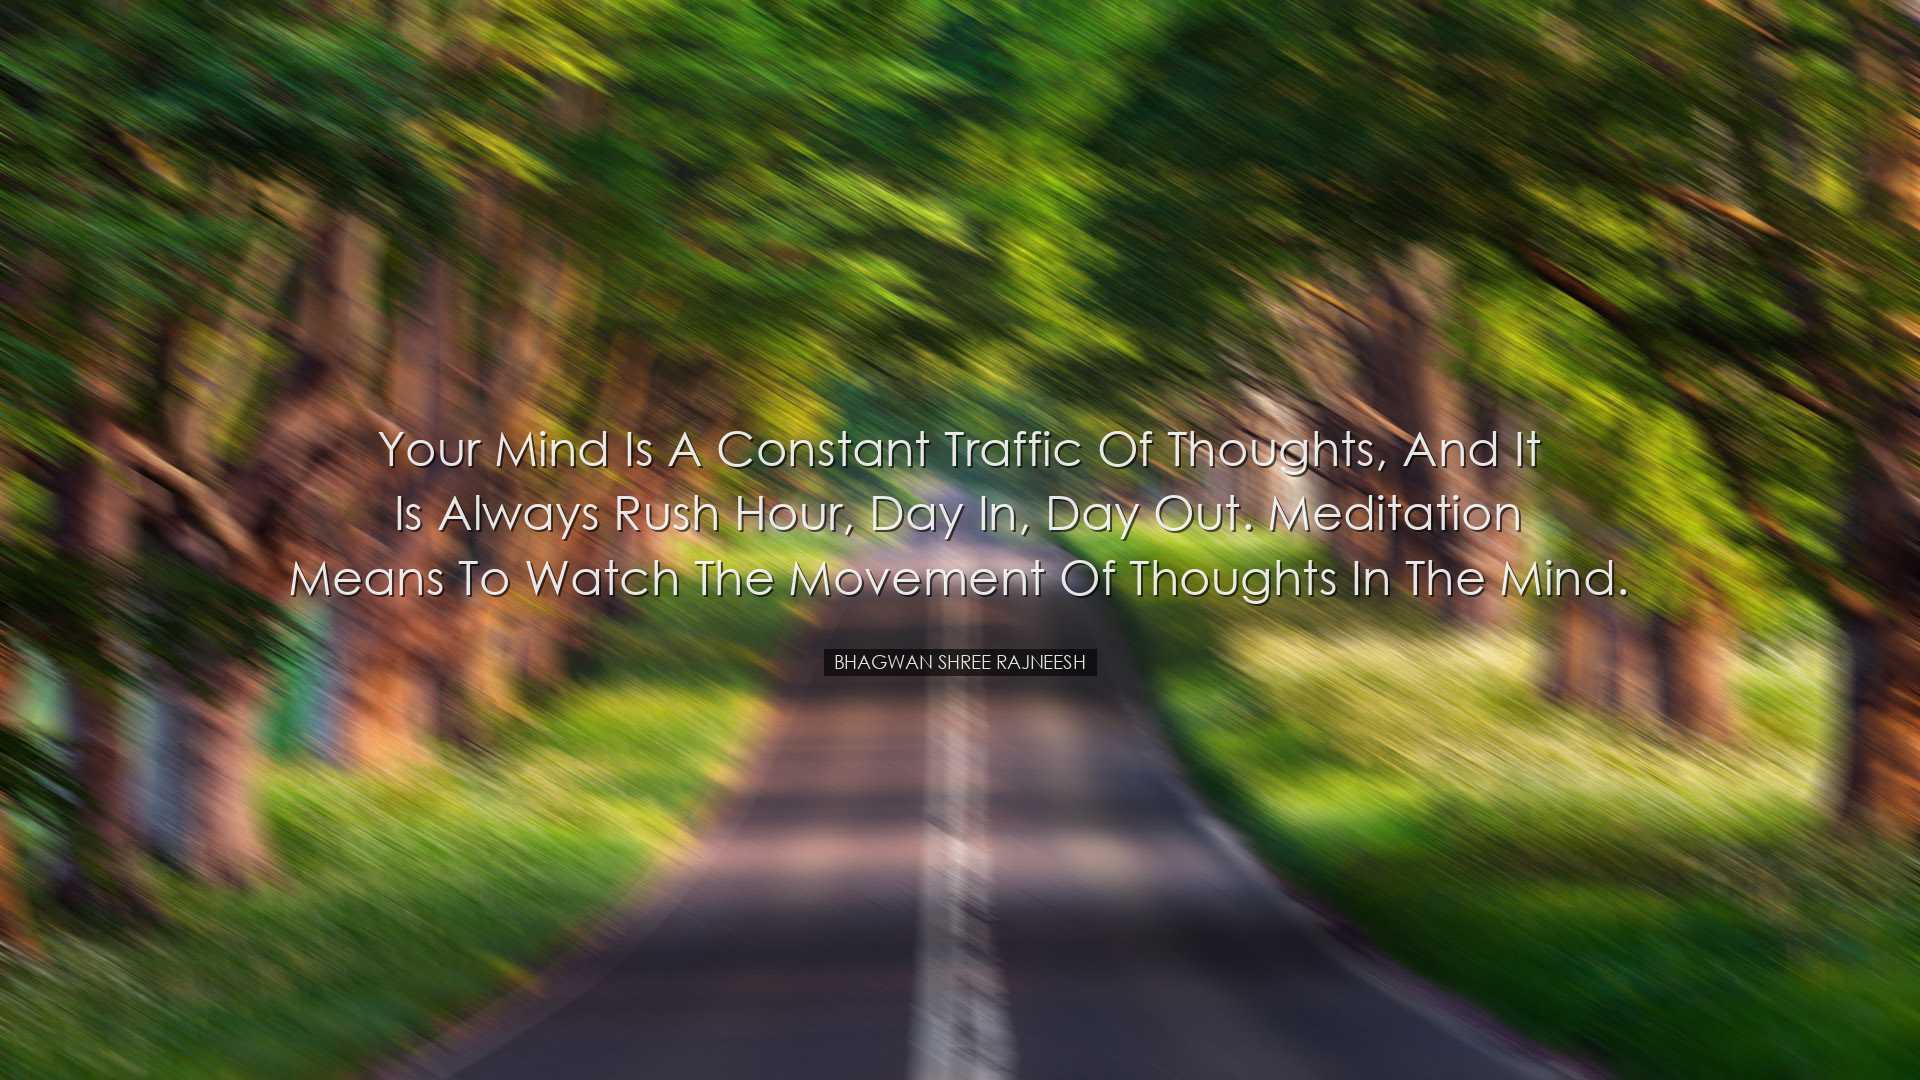 Your mind is a constant traffic of thoughts, and it is always rush